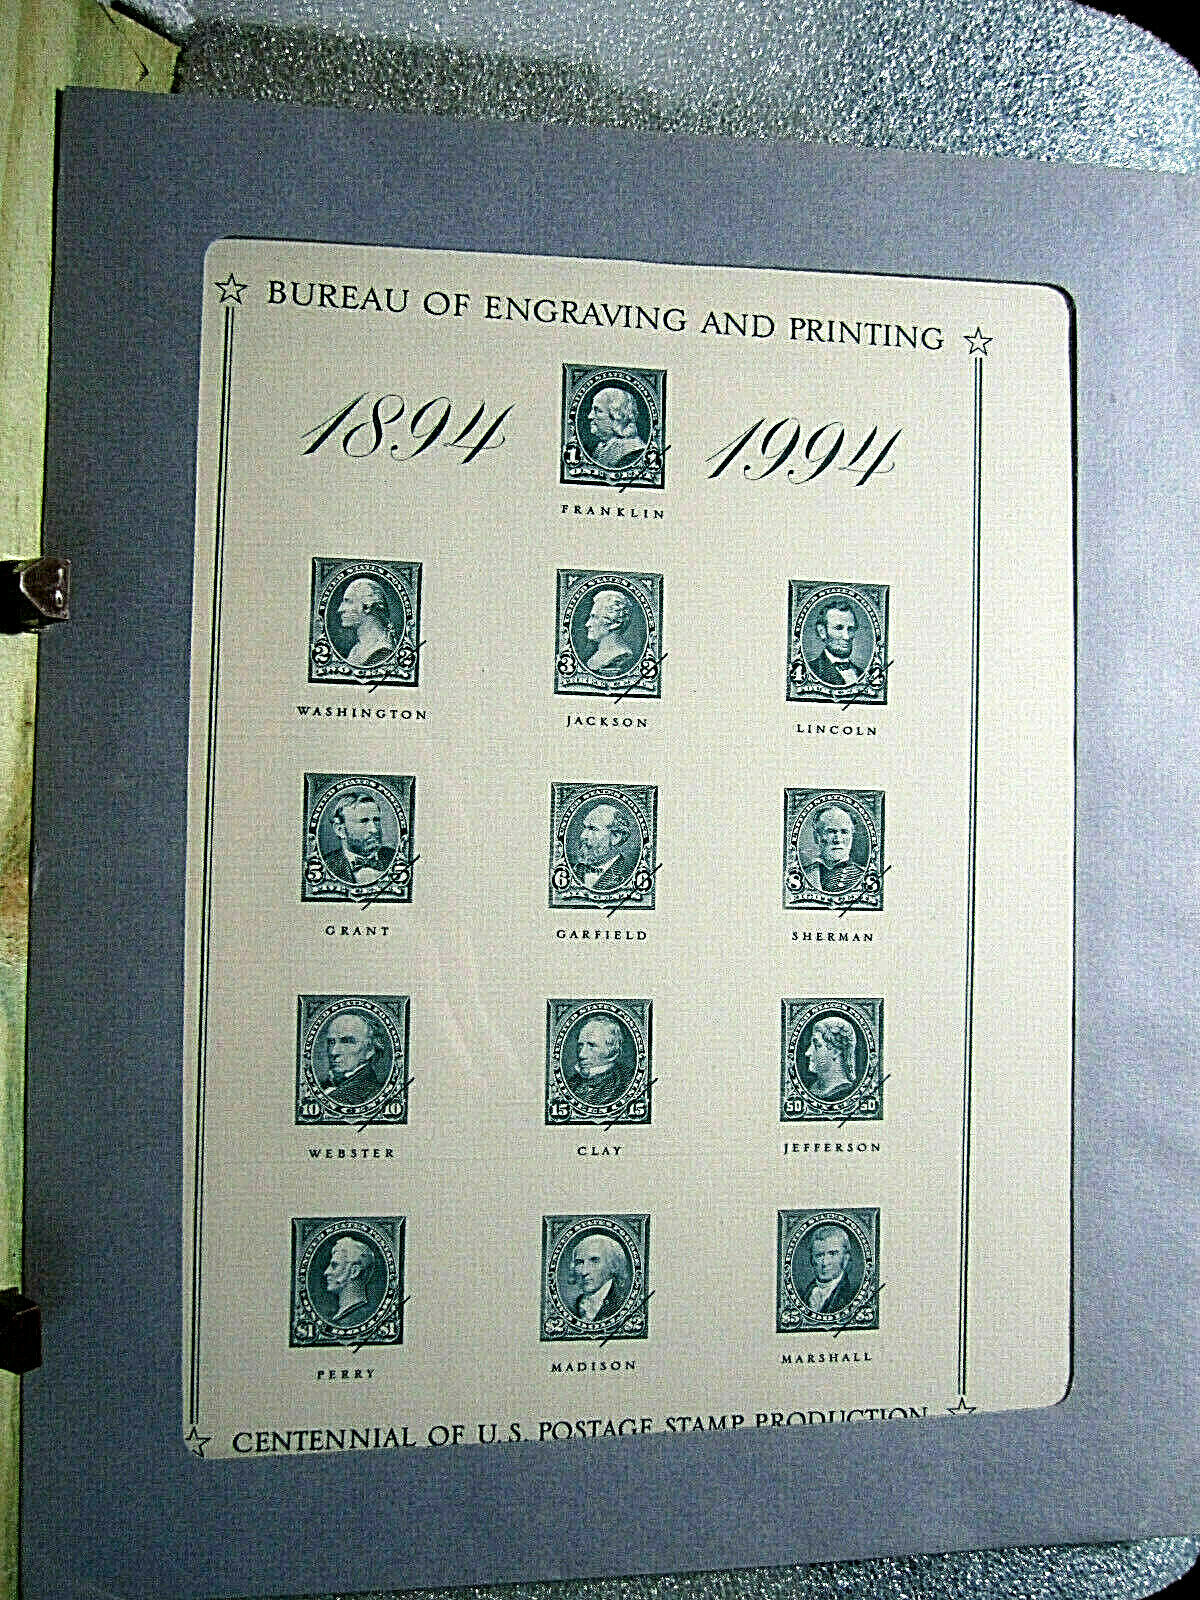 BUREAU OF ENGRAVING AND PRINTING ~ CENTENNIAL POSTAGE STAMP PRODUCTION 1894-1994